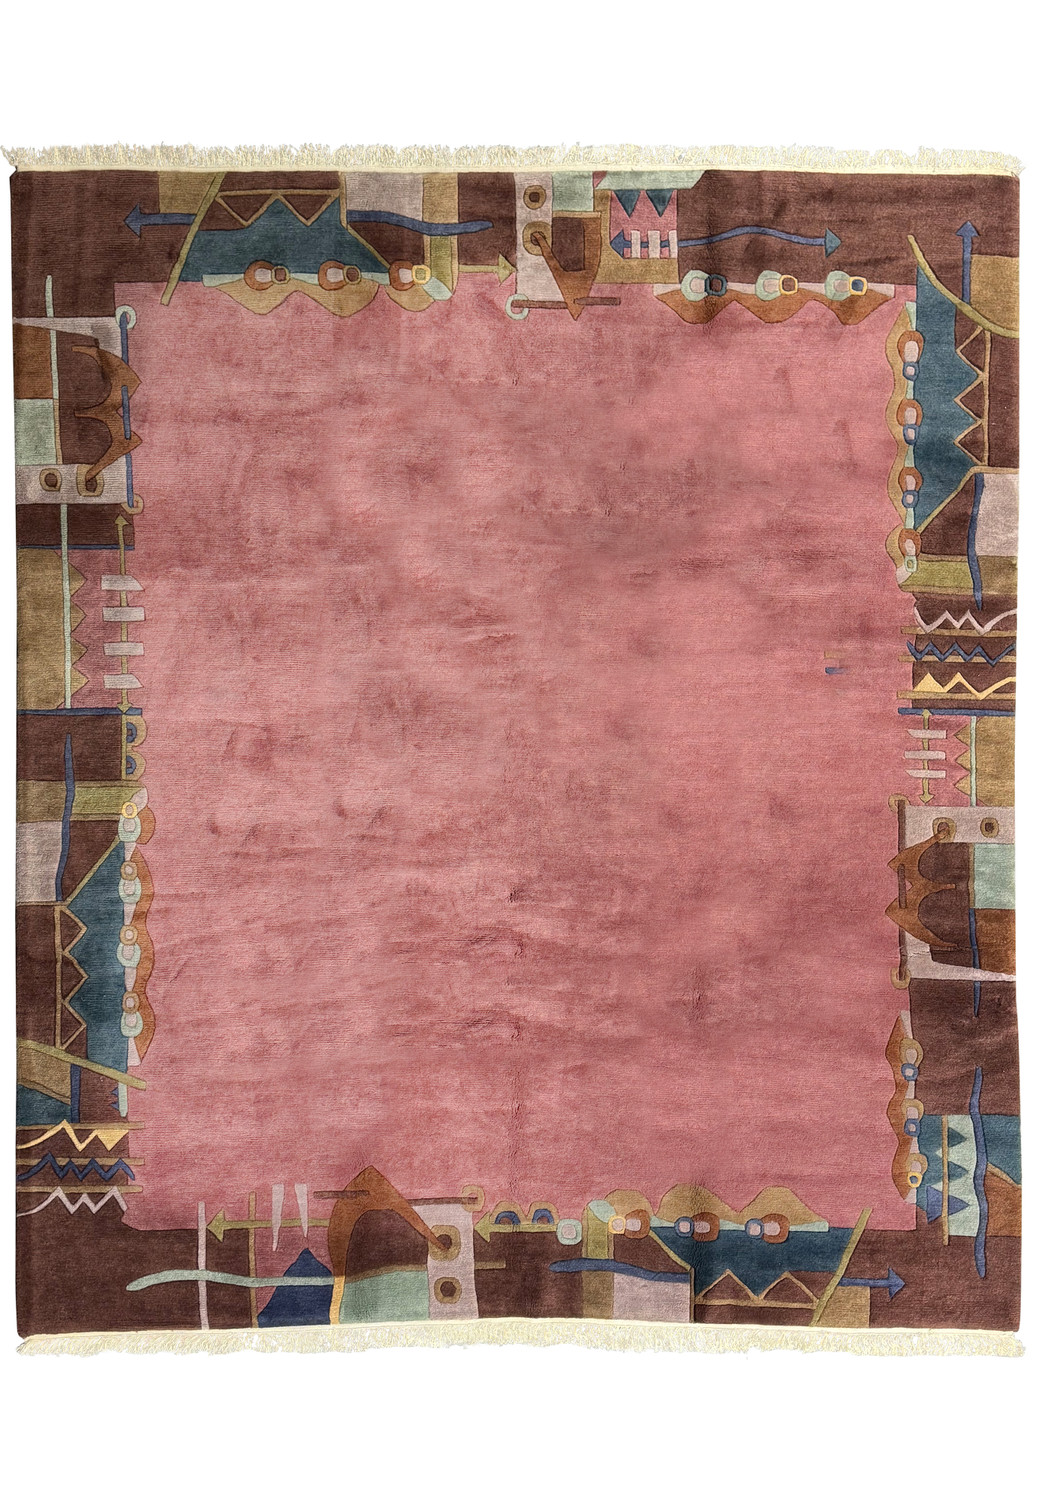 10x11'7 Dusty rose and earth-tone modern Tibet rug with abstract border design